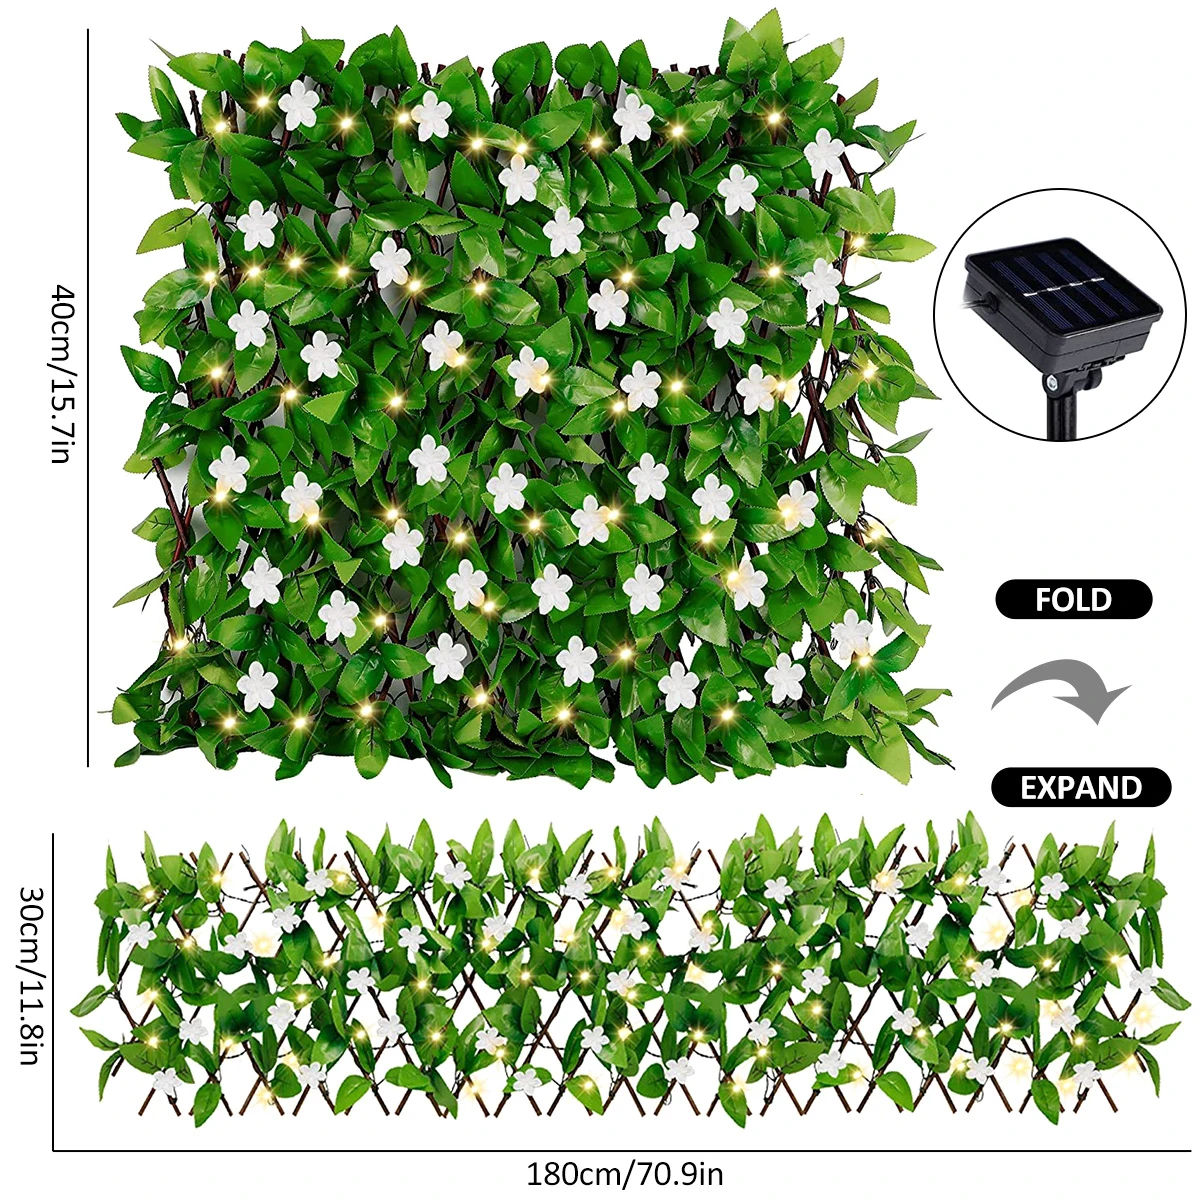 180cm Artificial Leaf Flower Retractable Fence Panels Hedge With Solar String Lights Garden Backyard Fence Greenery Wall Decor